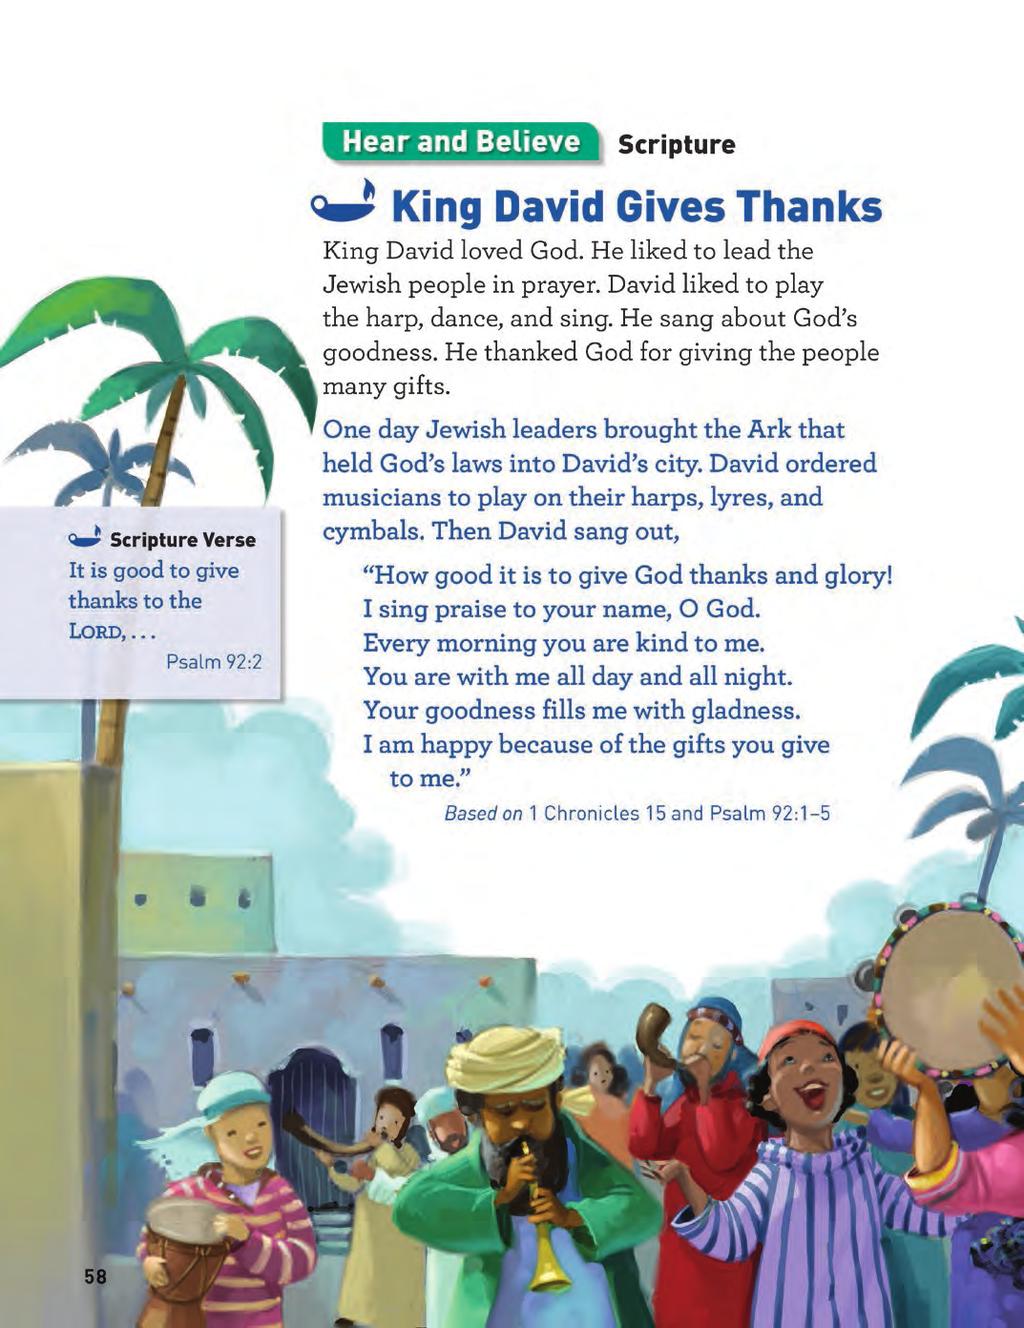 Grade 2 Hear and Believe Page DOCTRINE PAGES The next two pages consist of doctrine, Scripture, liturgical texts, saints biographies, and inspirational stories.